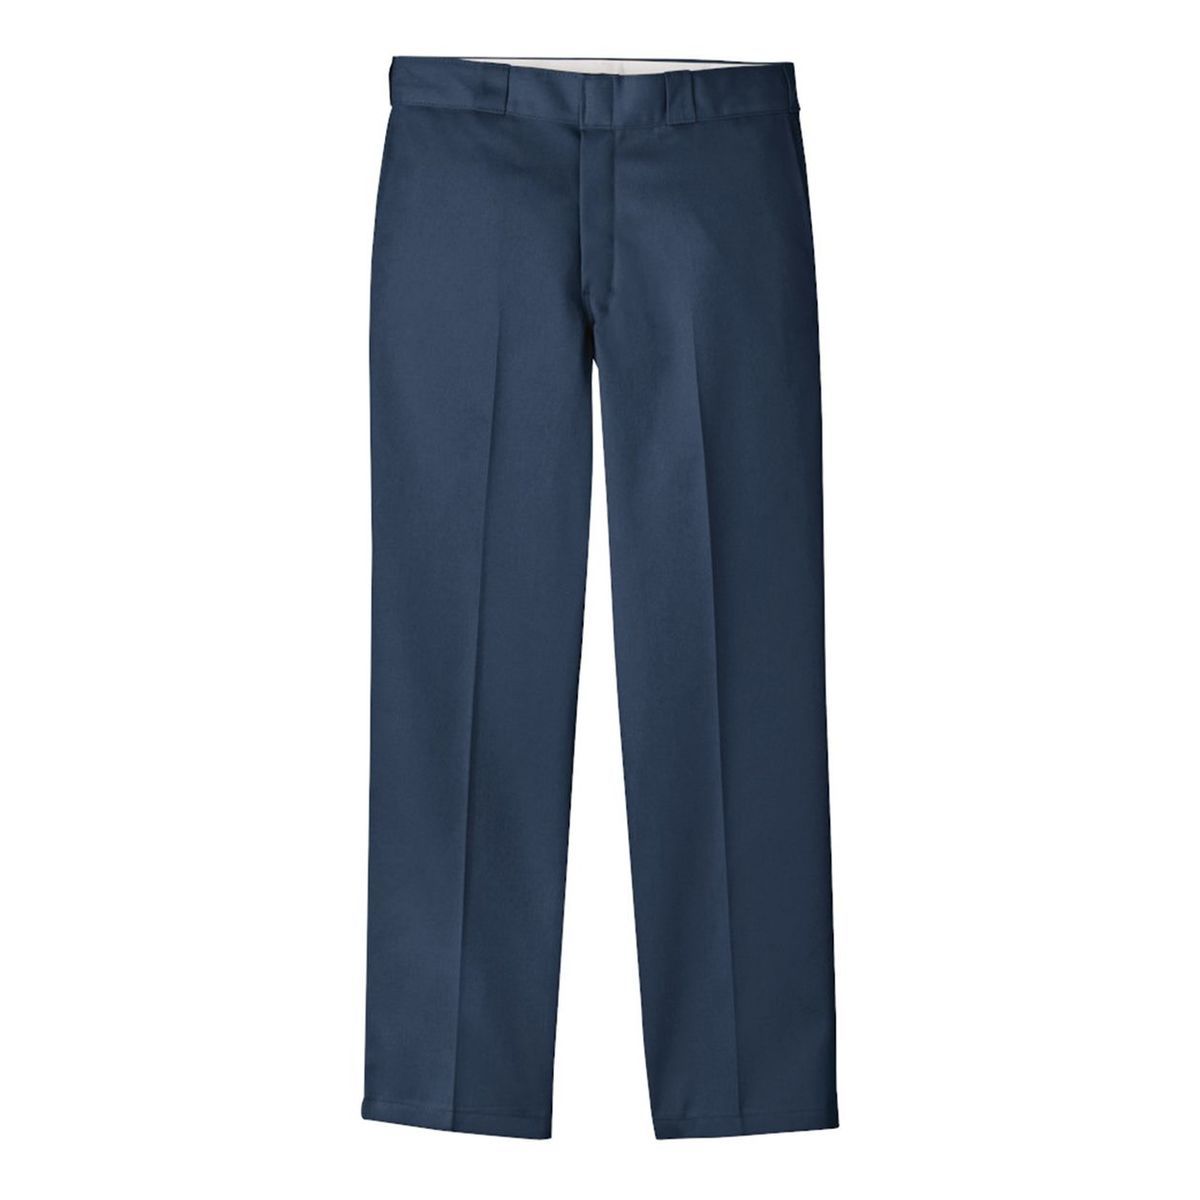 Picture of Dickies B65330669 Work Pants, Navy - 32I - Size 48W